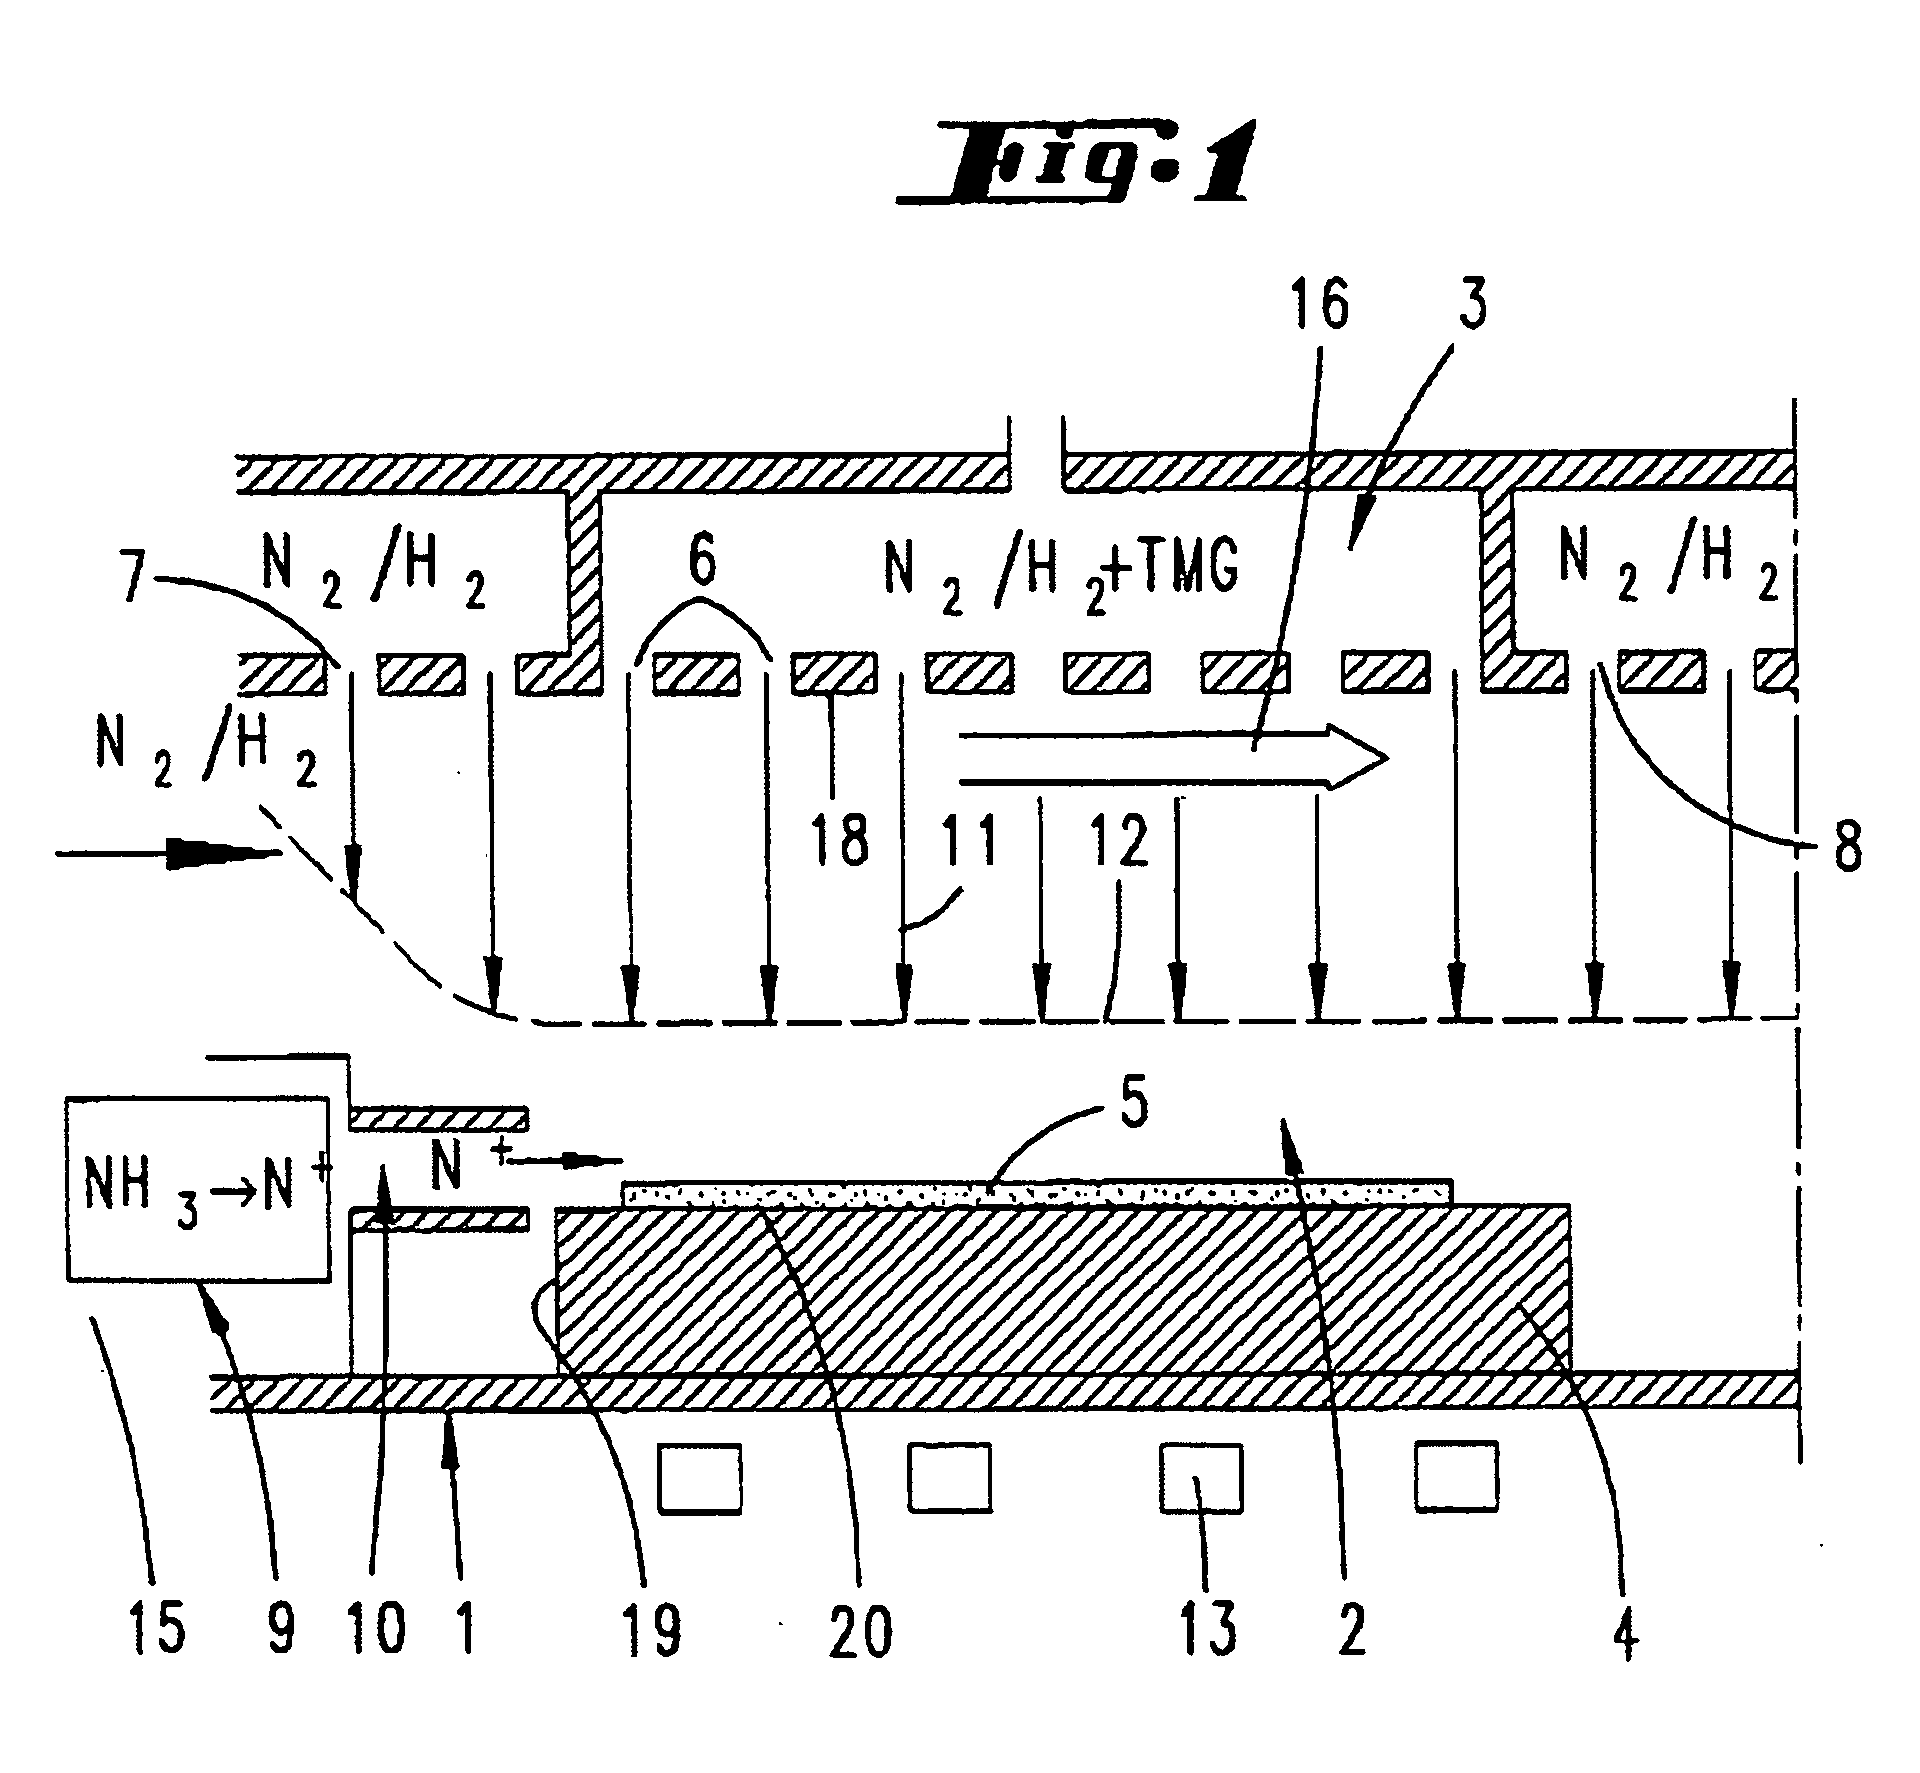 Process and apparatus for depositing semiconductor layers using two process gases, one of which is preconditioned